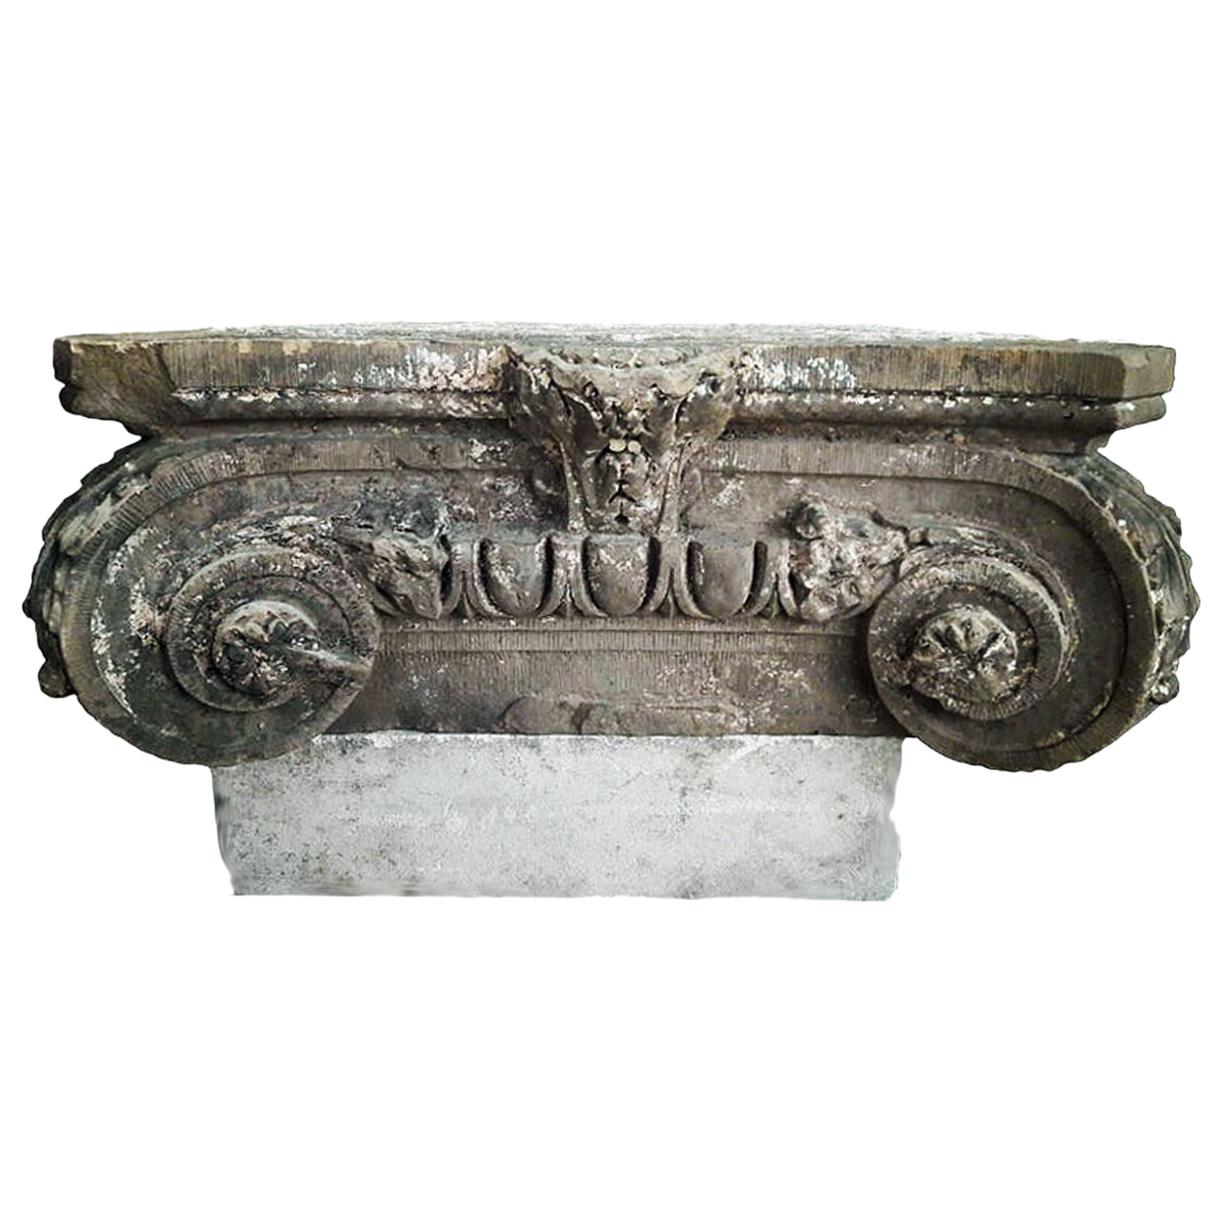 Antique French Stone Column Capital, Ionian Style, Mid-19th Century